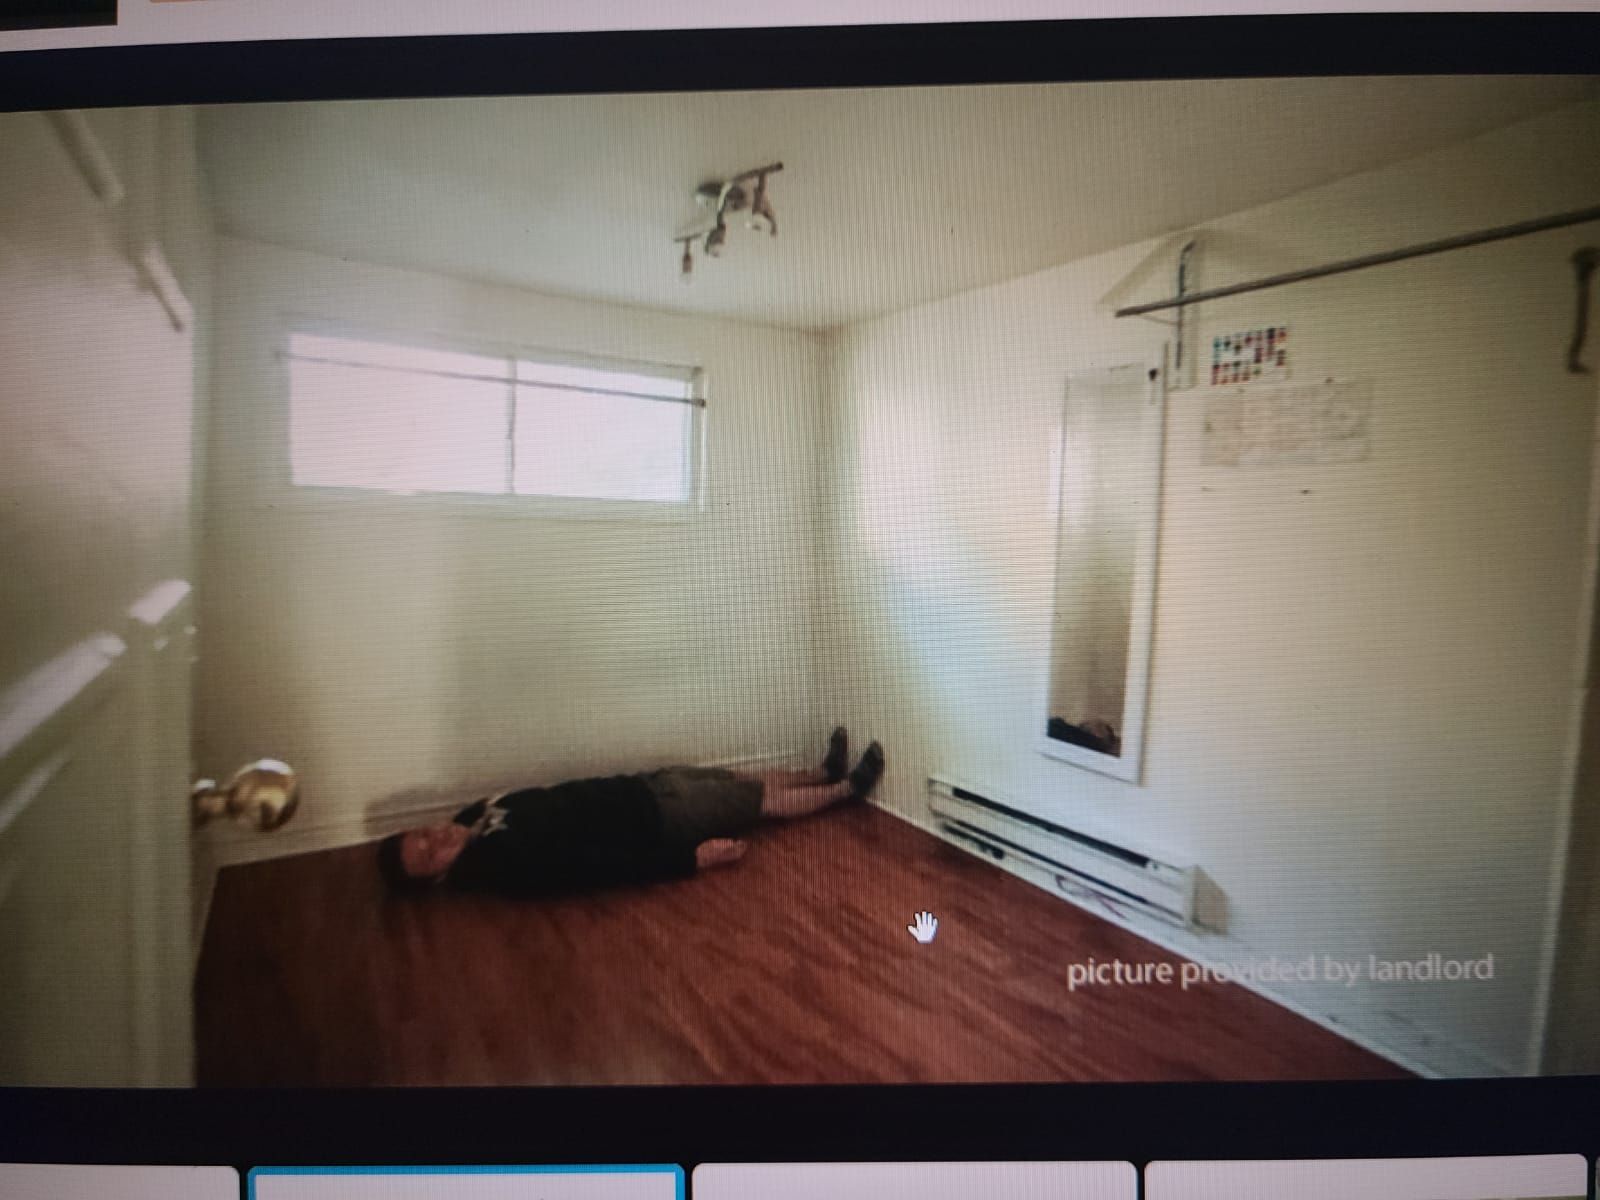 Was looking for an apartment. Found a listing which measured the Room size with Human for Scale.